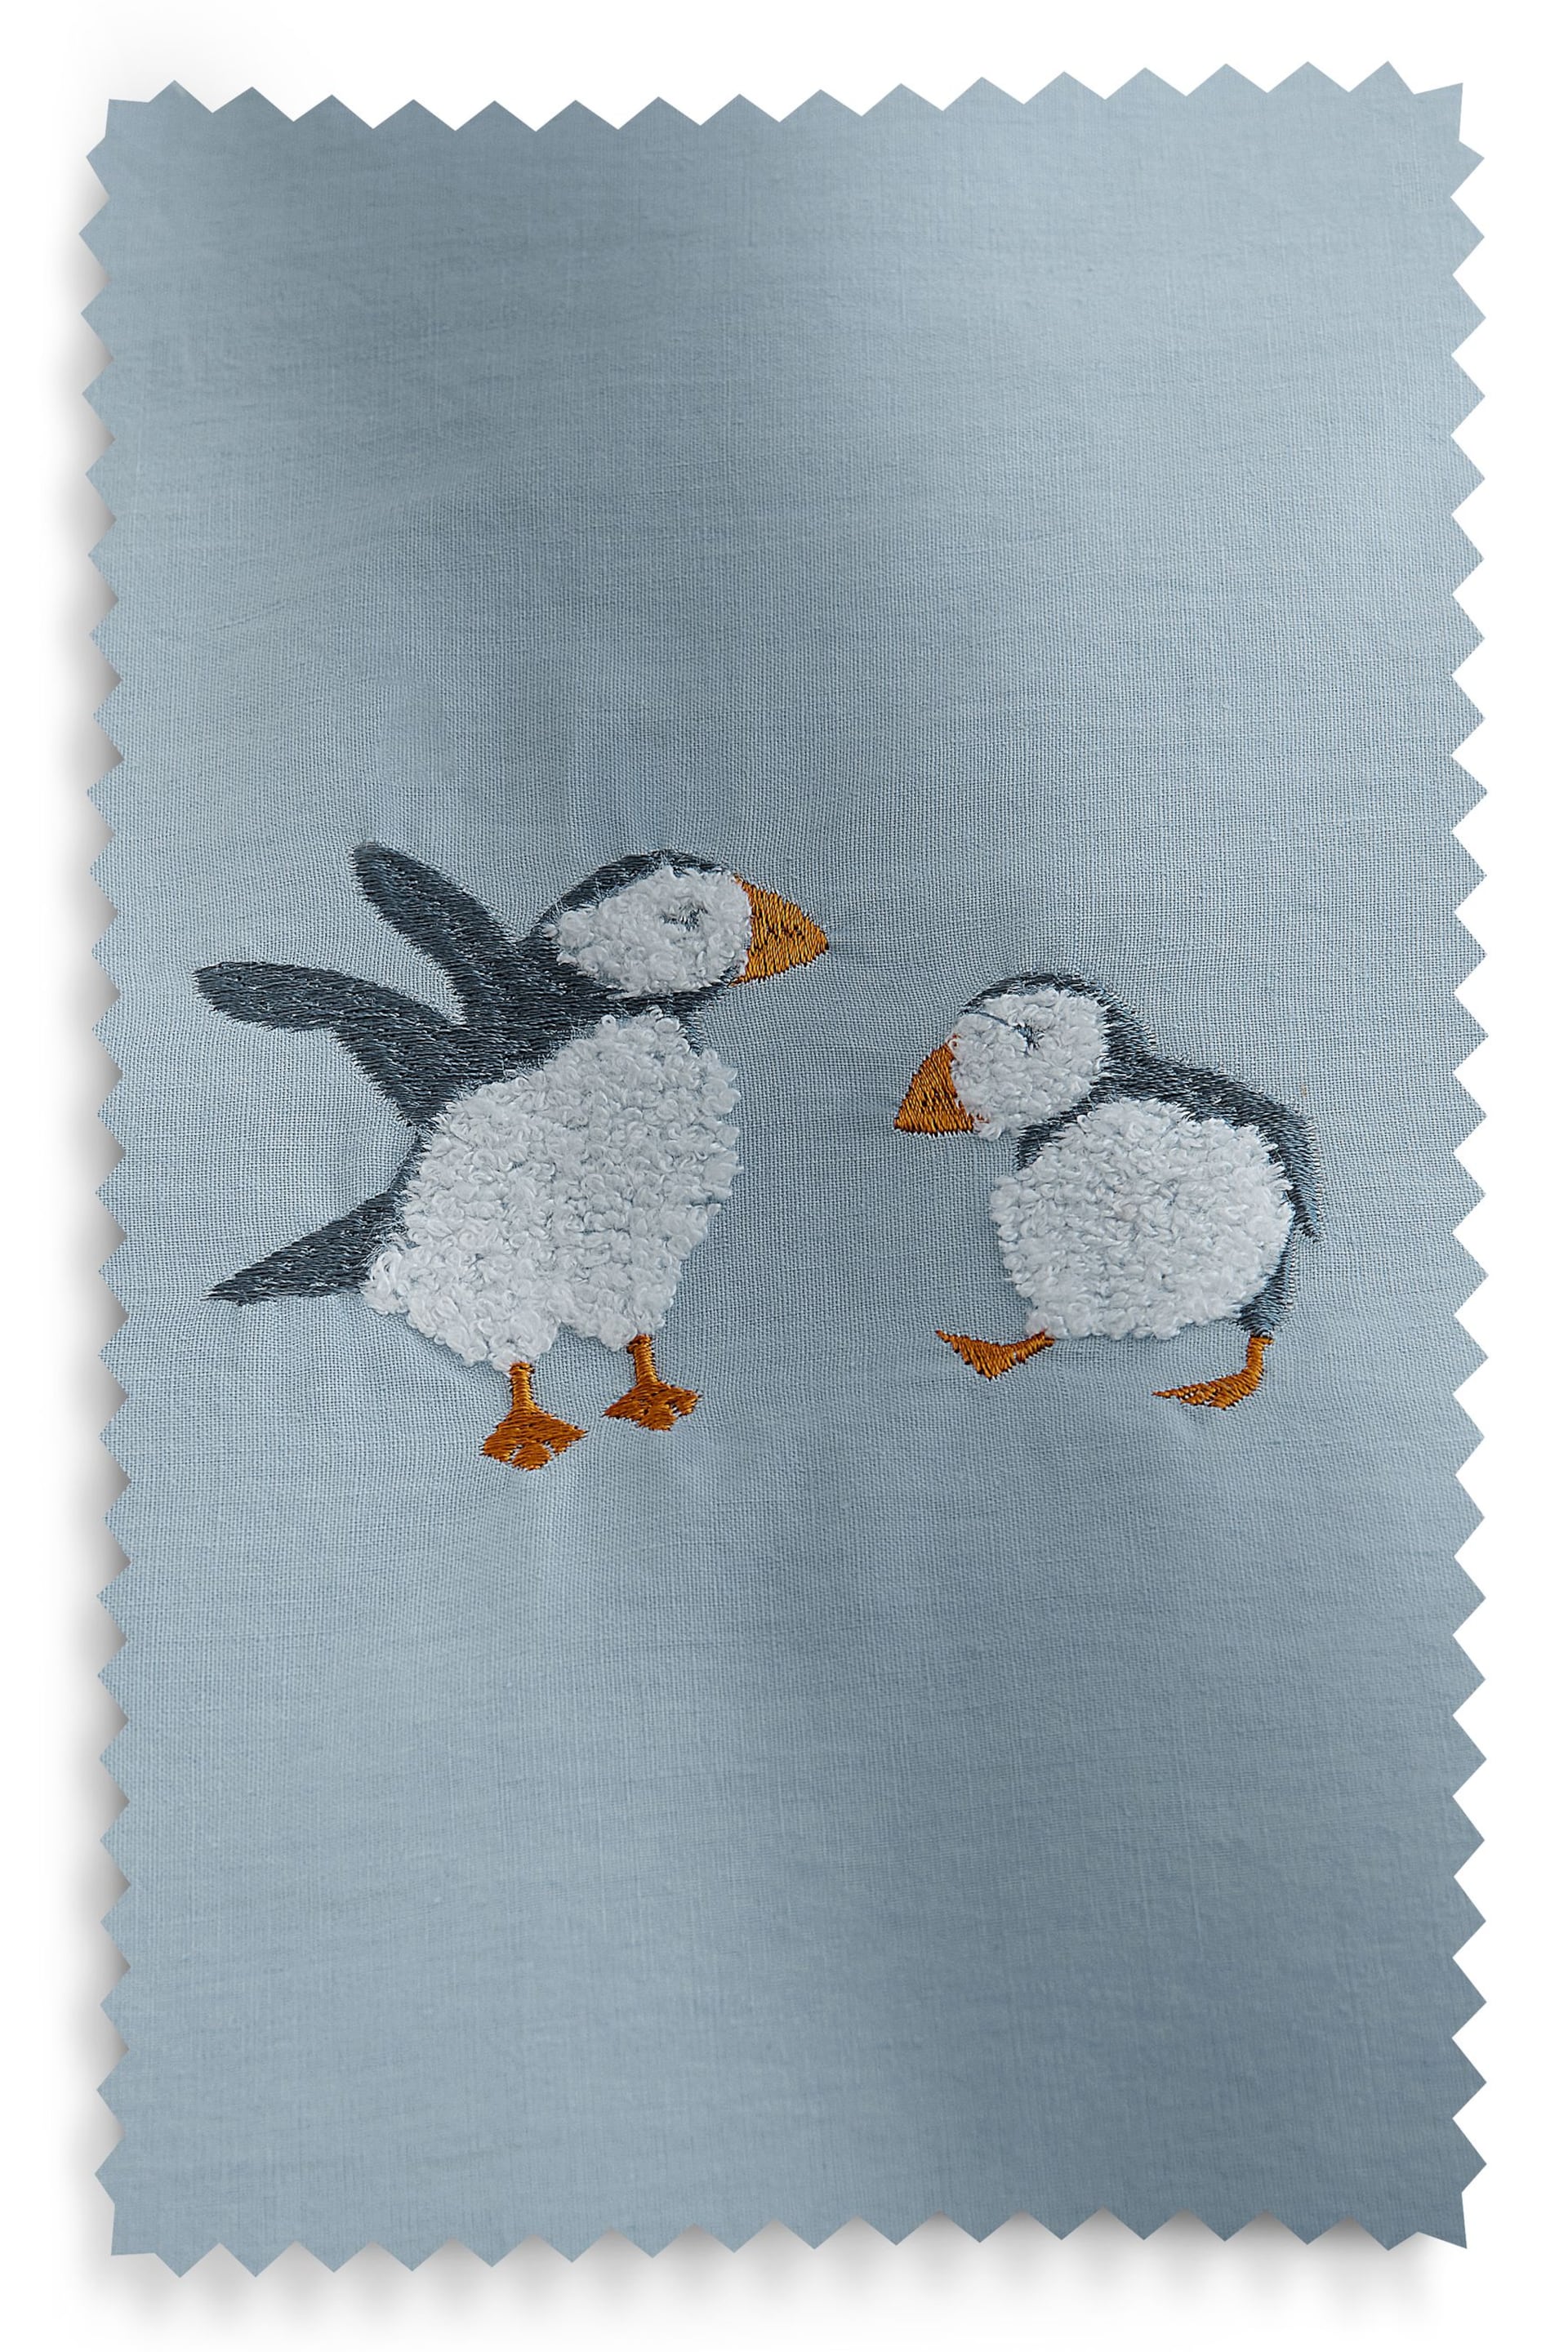 Blue Tufted Puffin Duvet Cover and Pillowcase Set - Image 4 of 5